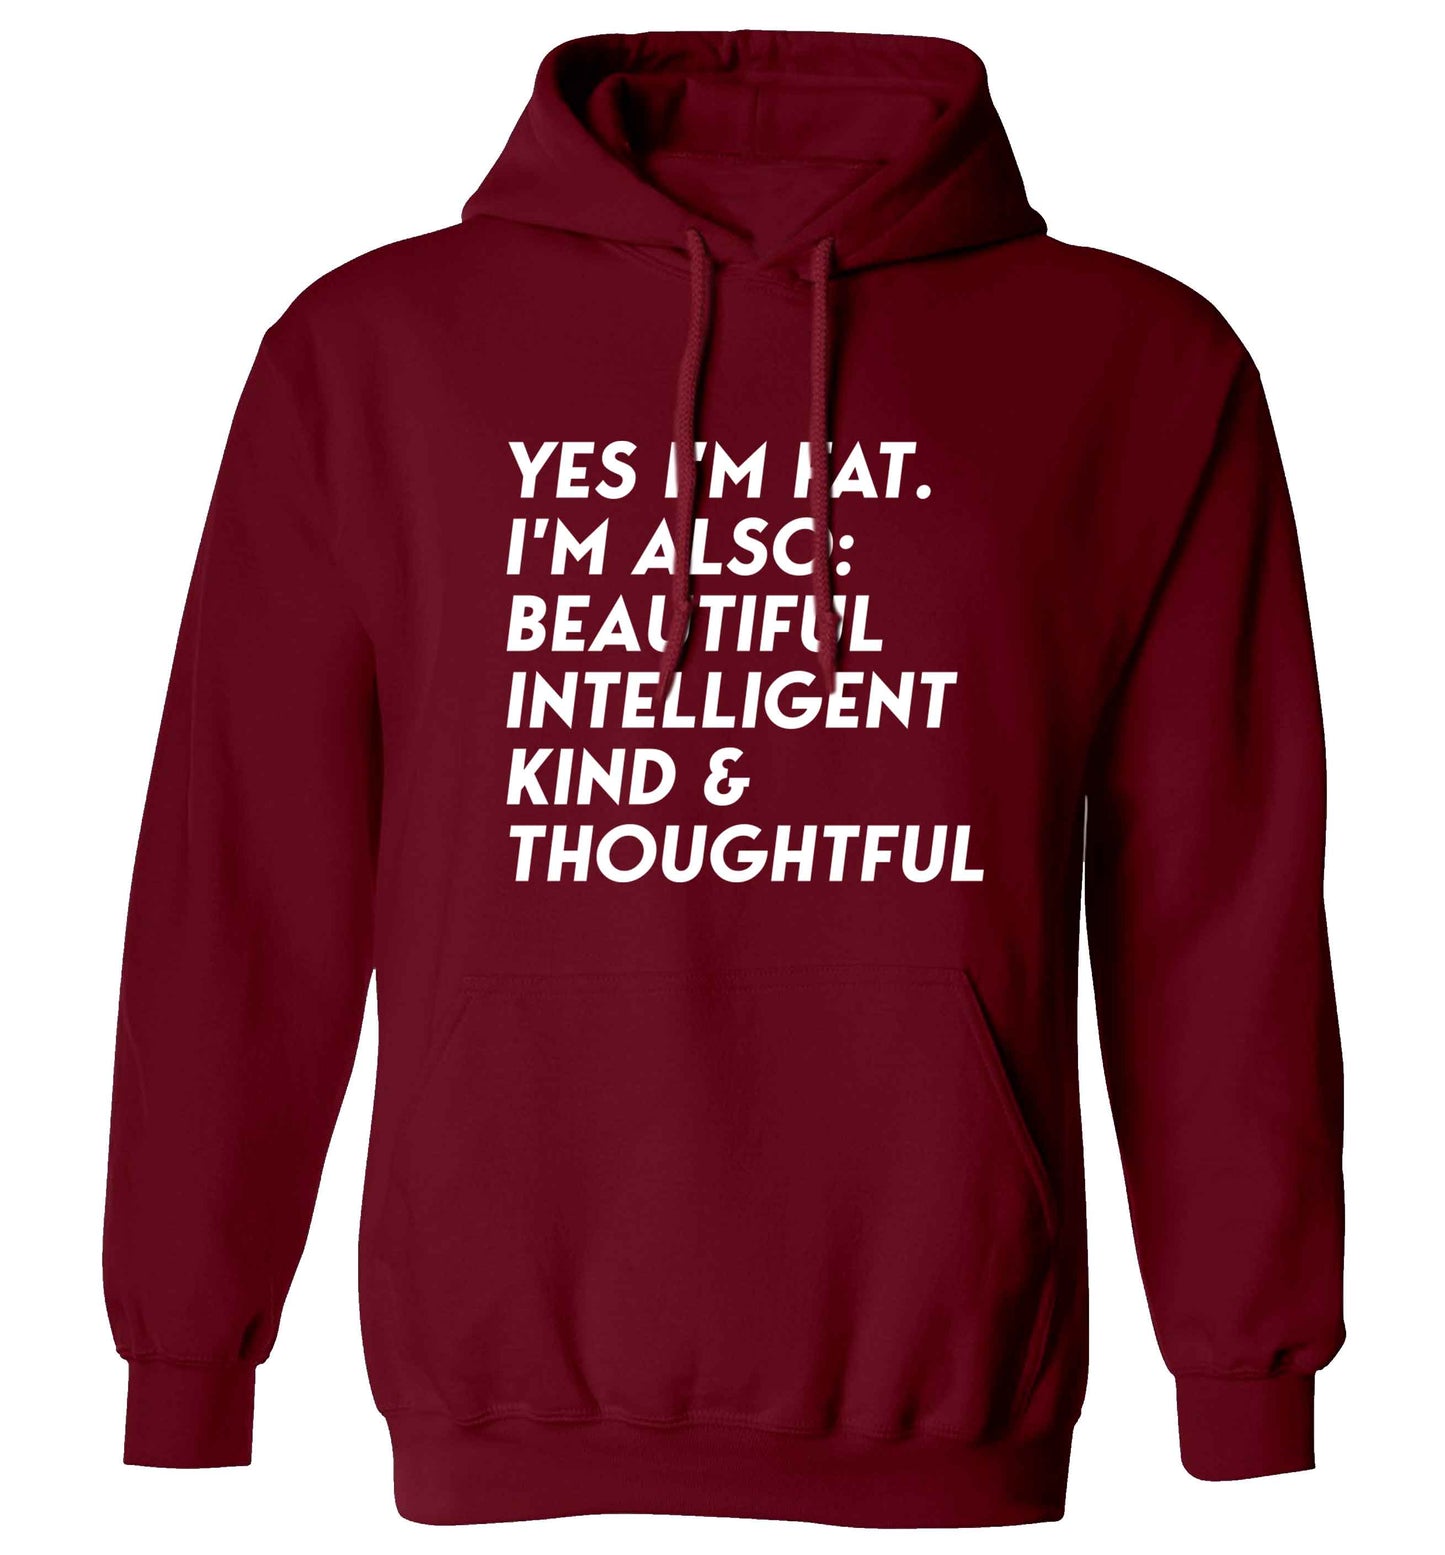 Yes I'm fat. I'm also: Beautiful intelligent kind and thoughtful adults unisex maroon hoodie 2XL